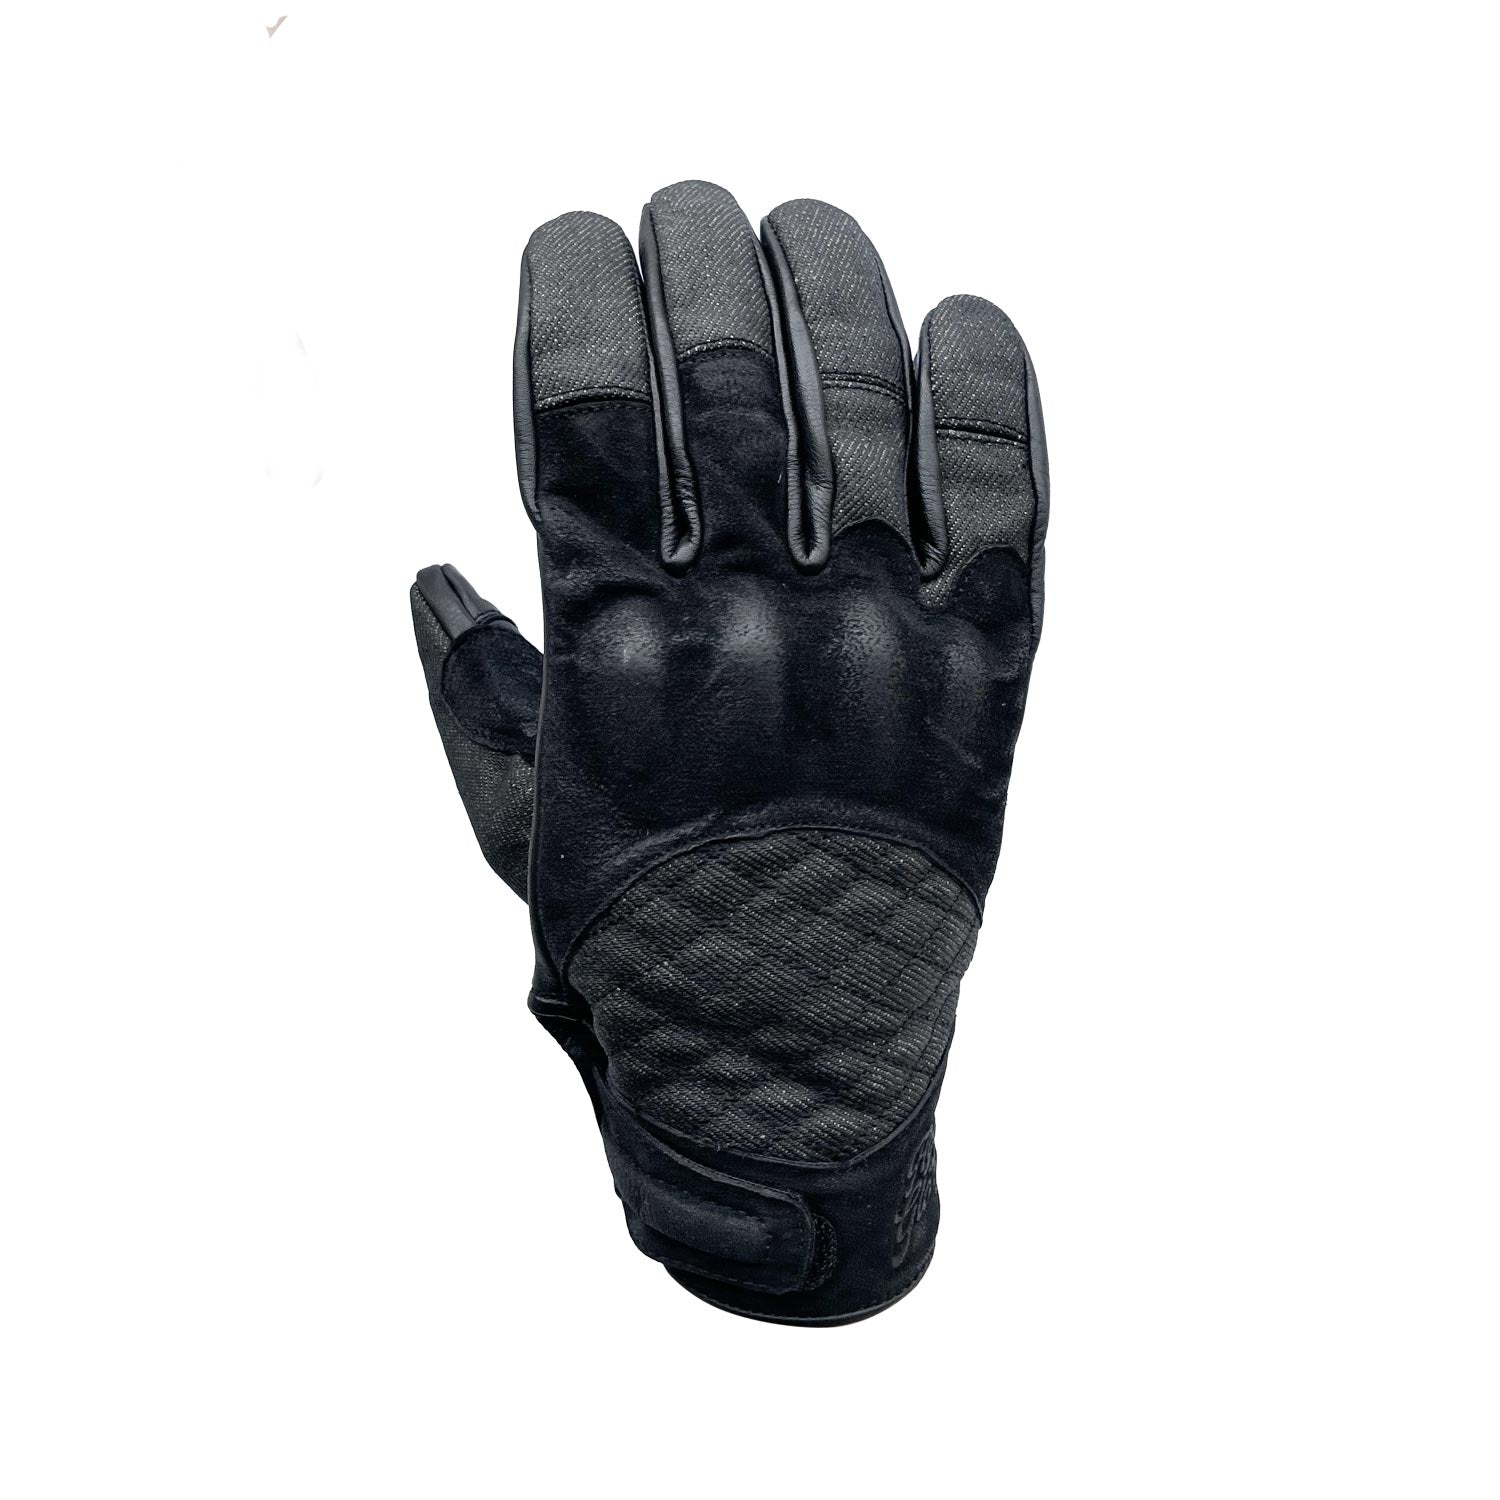 Age of Glory Shifter Gloves leather and Denim